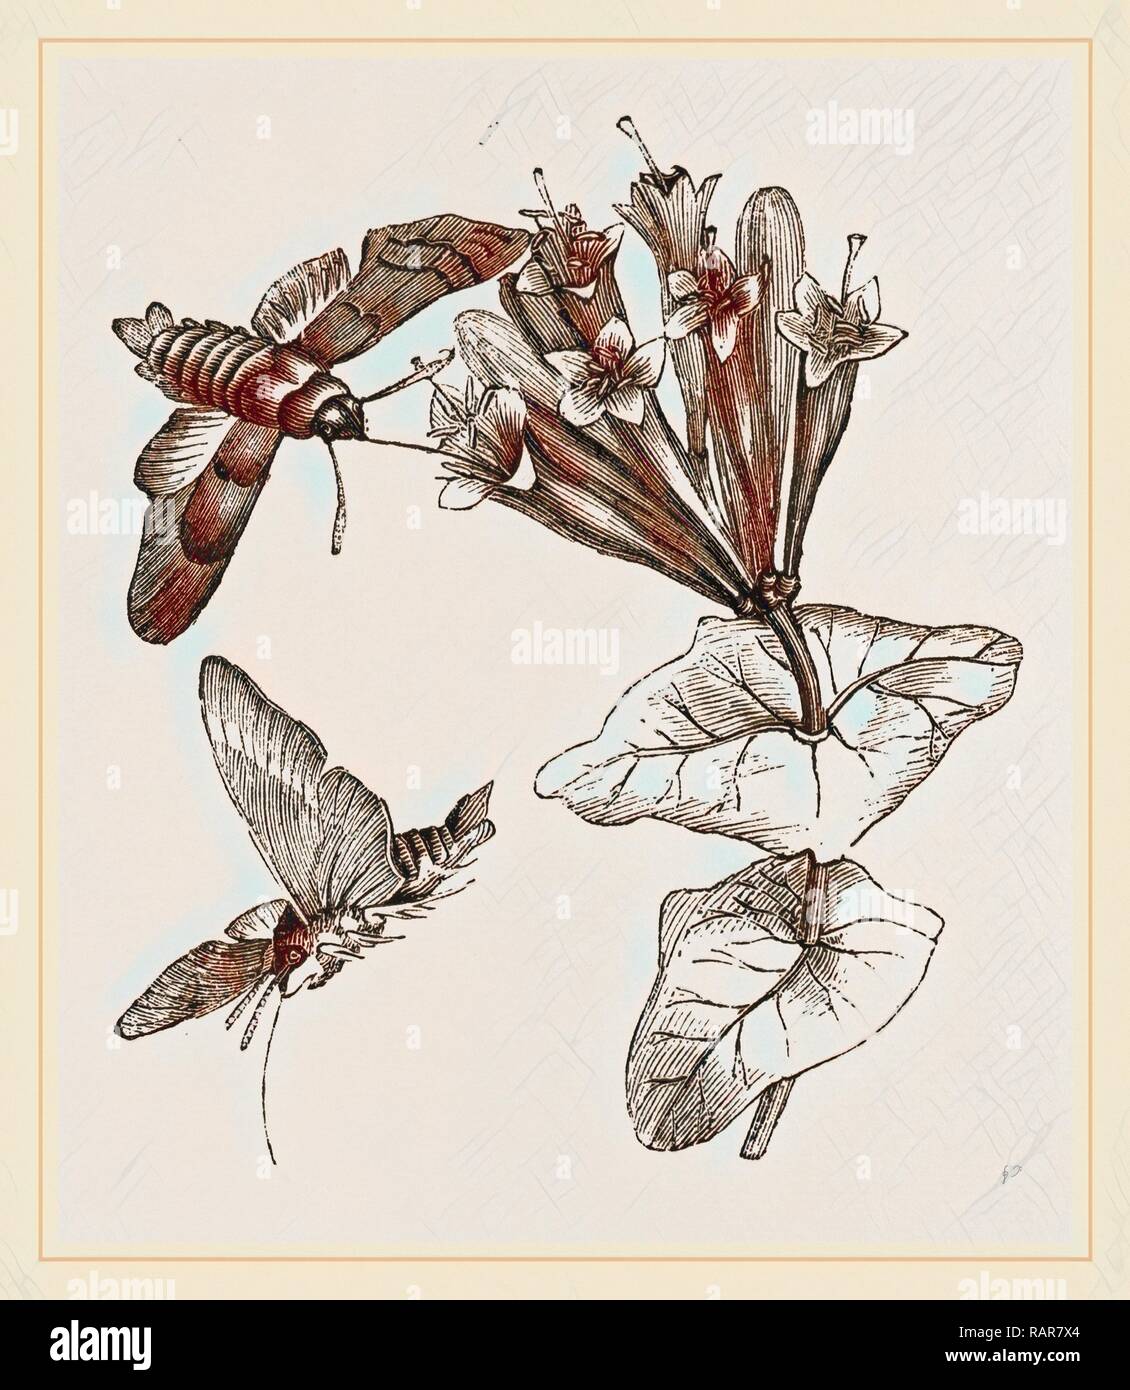 Humming-bird Moth and Honeysuckle. Reimagined by Gibon. Classic art with a modern twist reimagined Stock Photo